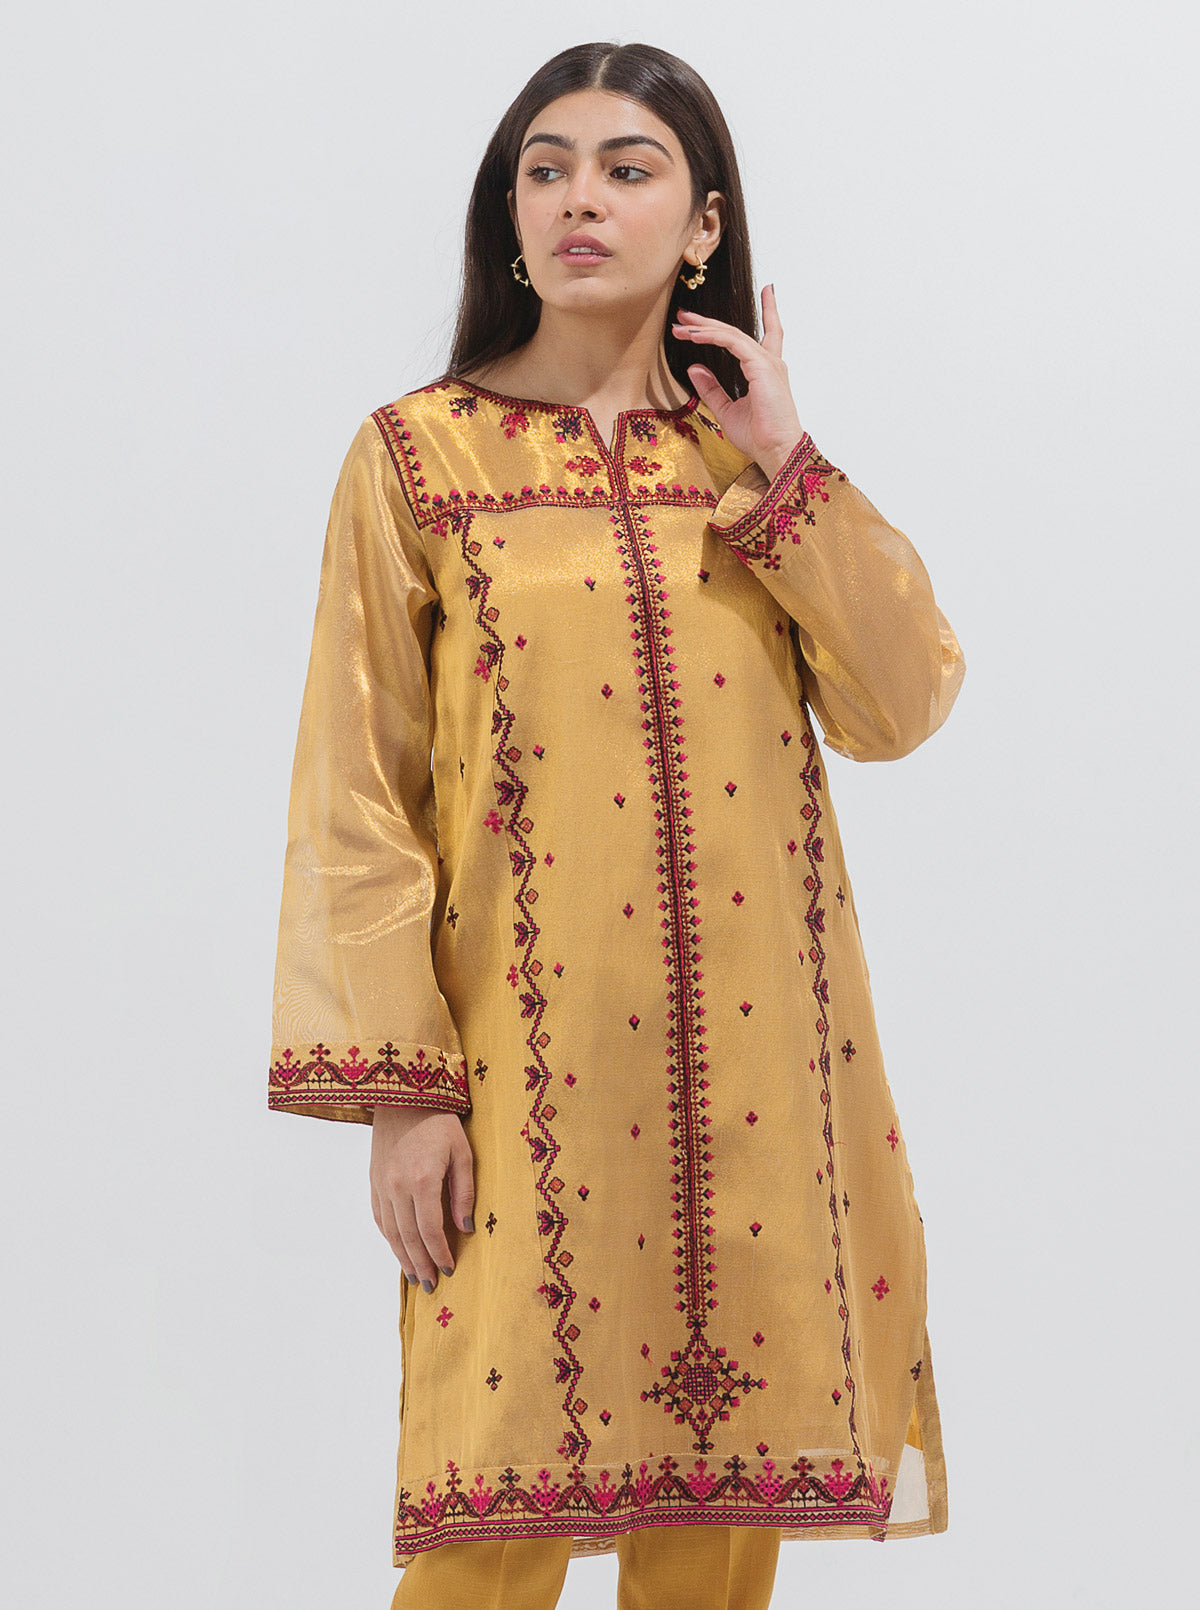 EMBROIDERED TISSUE SHIRT (LUXURY PRET) - BEECHTREE